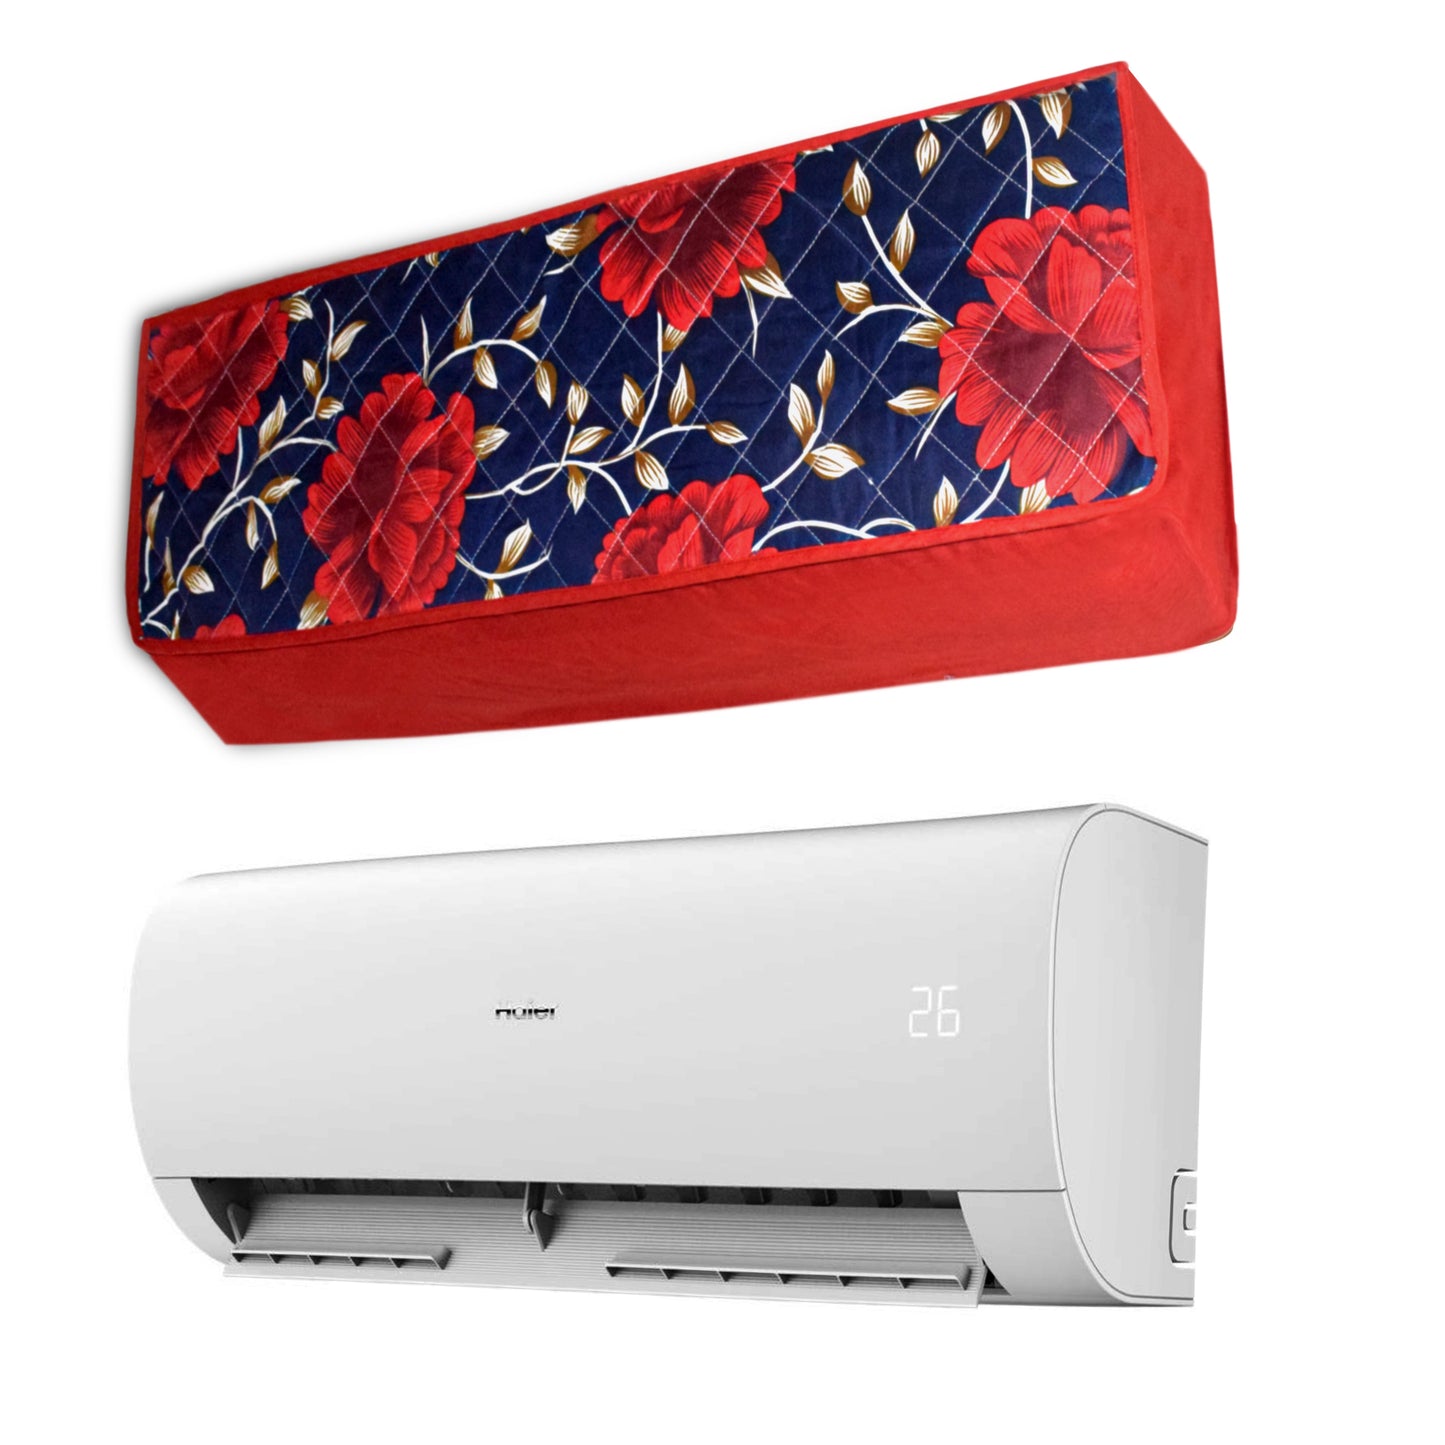 Blue & Red Printed Indoor & Outdoor AC Cover